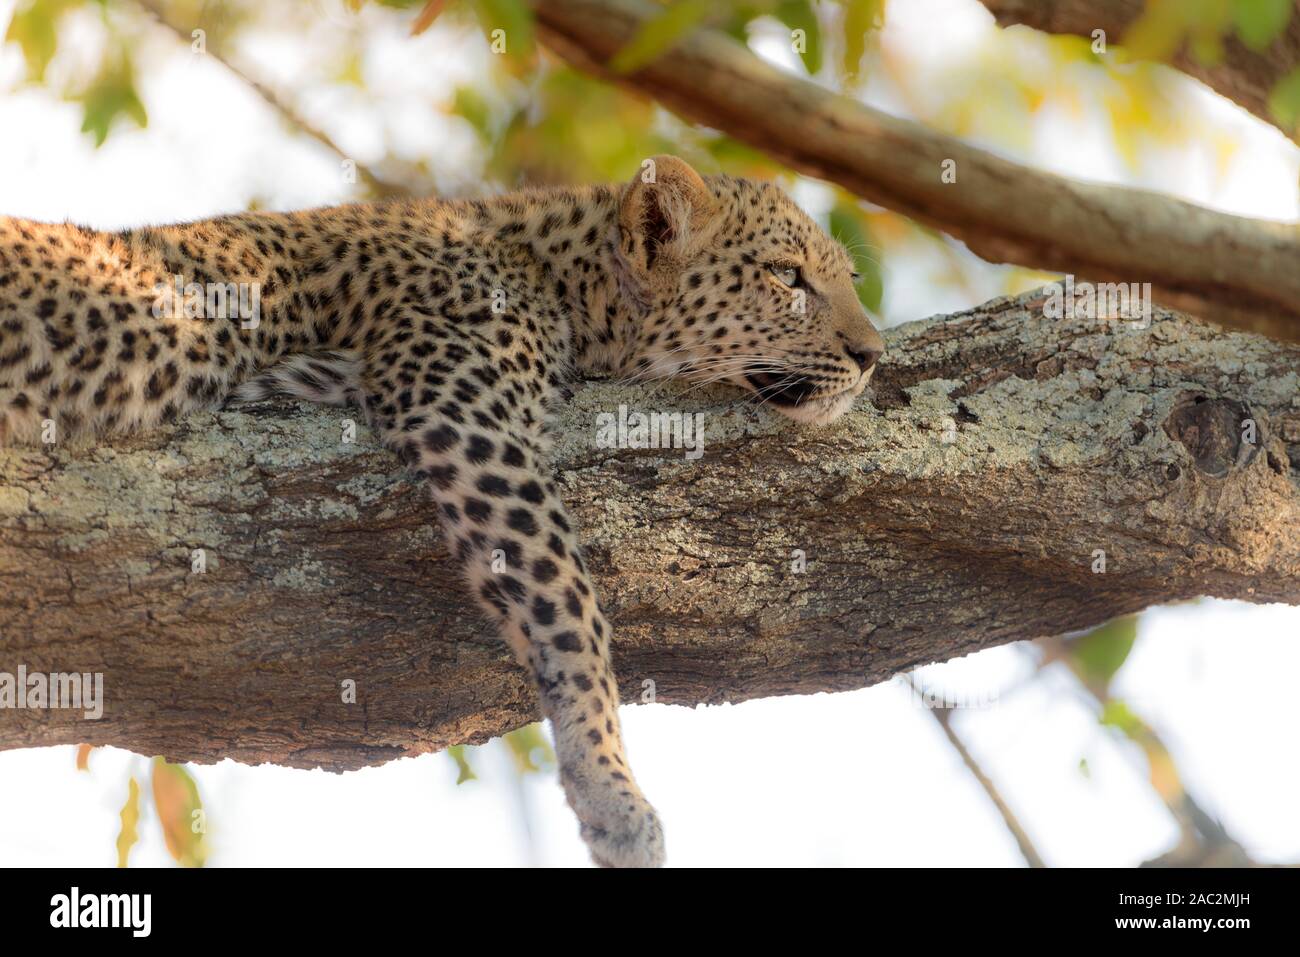 Cute baby leopard resting on tree Stock Photo